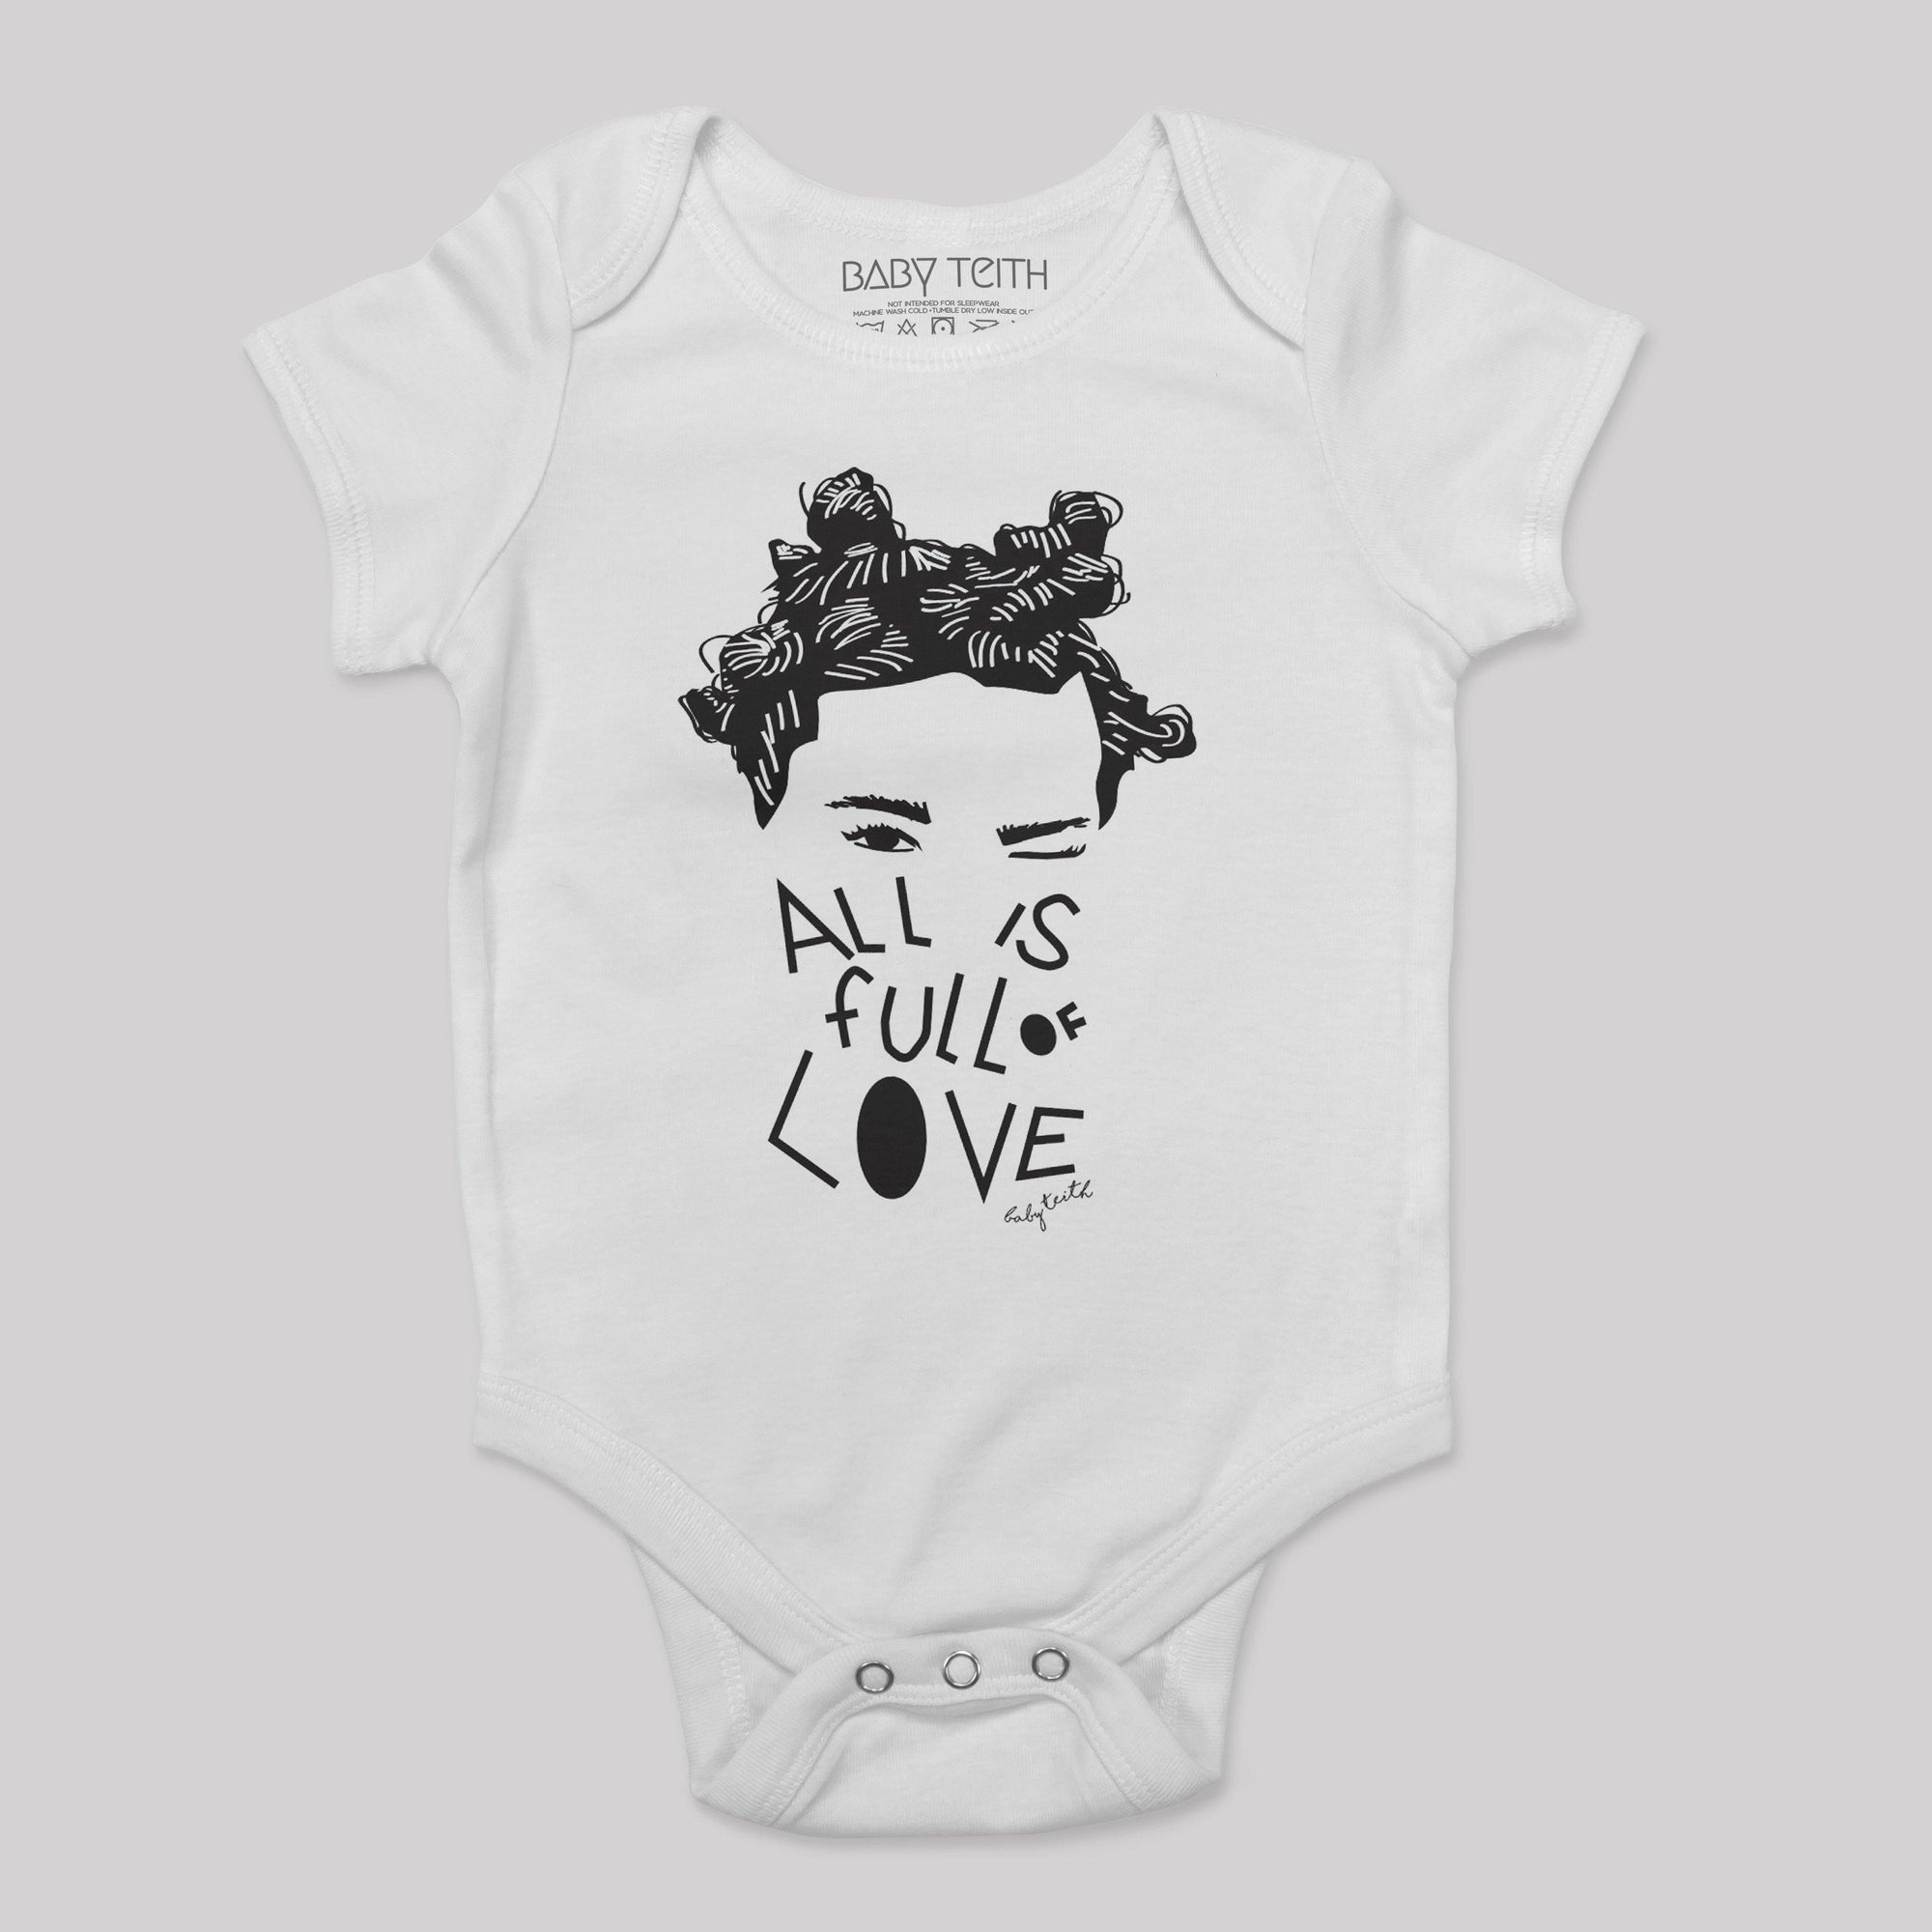 "All is Full of Love" Bodysuit - Baby Teith